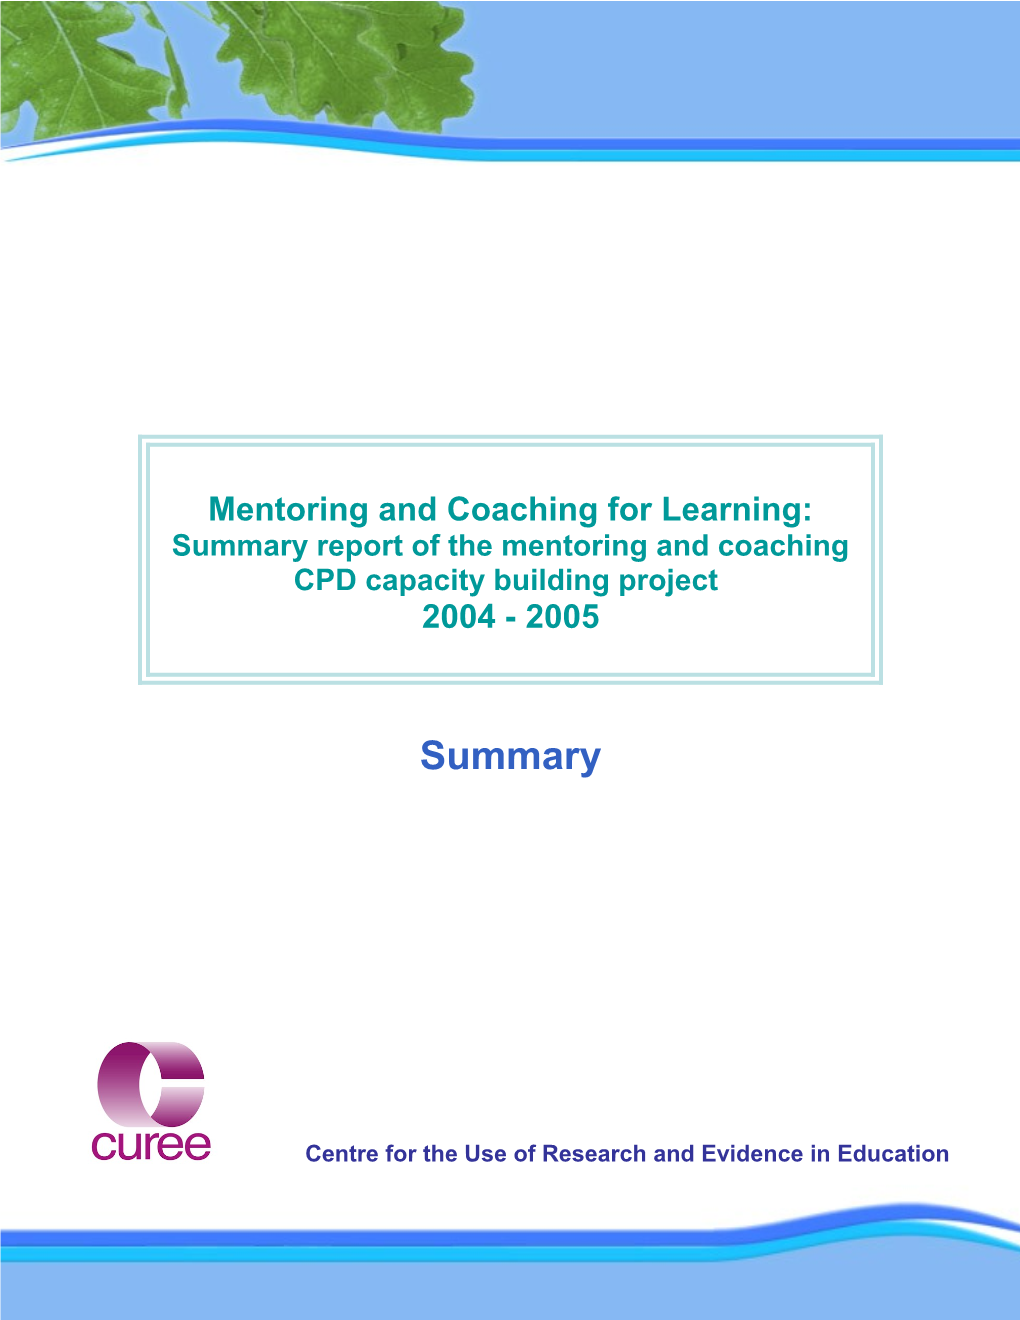 Mentoring and Coaching - Final Report